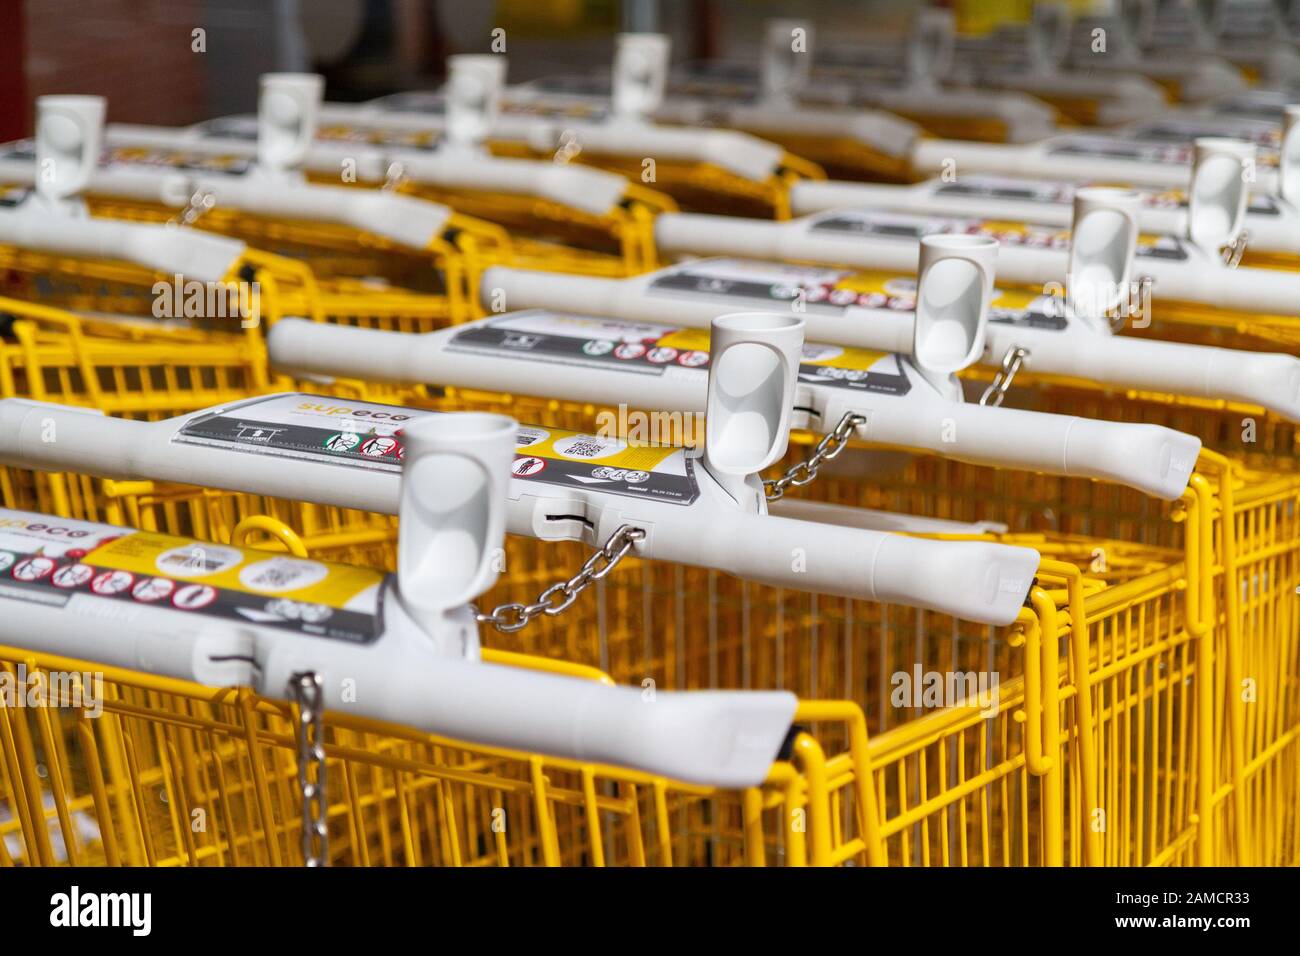 Rows of yellow branded shopping trolleys (carts) at a supermarket in France. Stock Photo